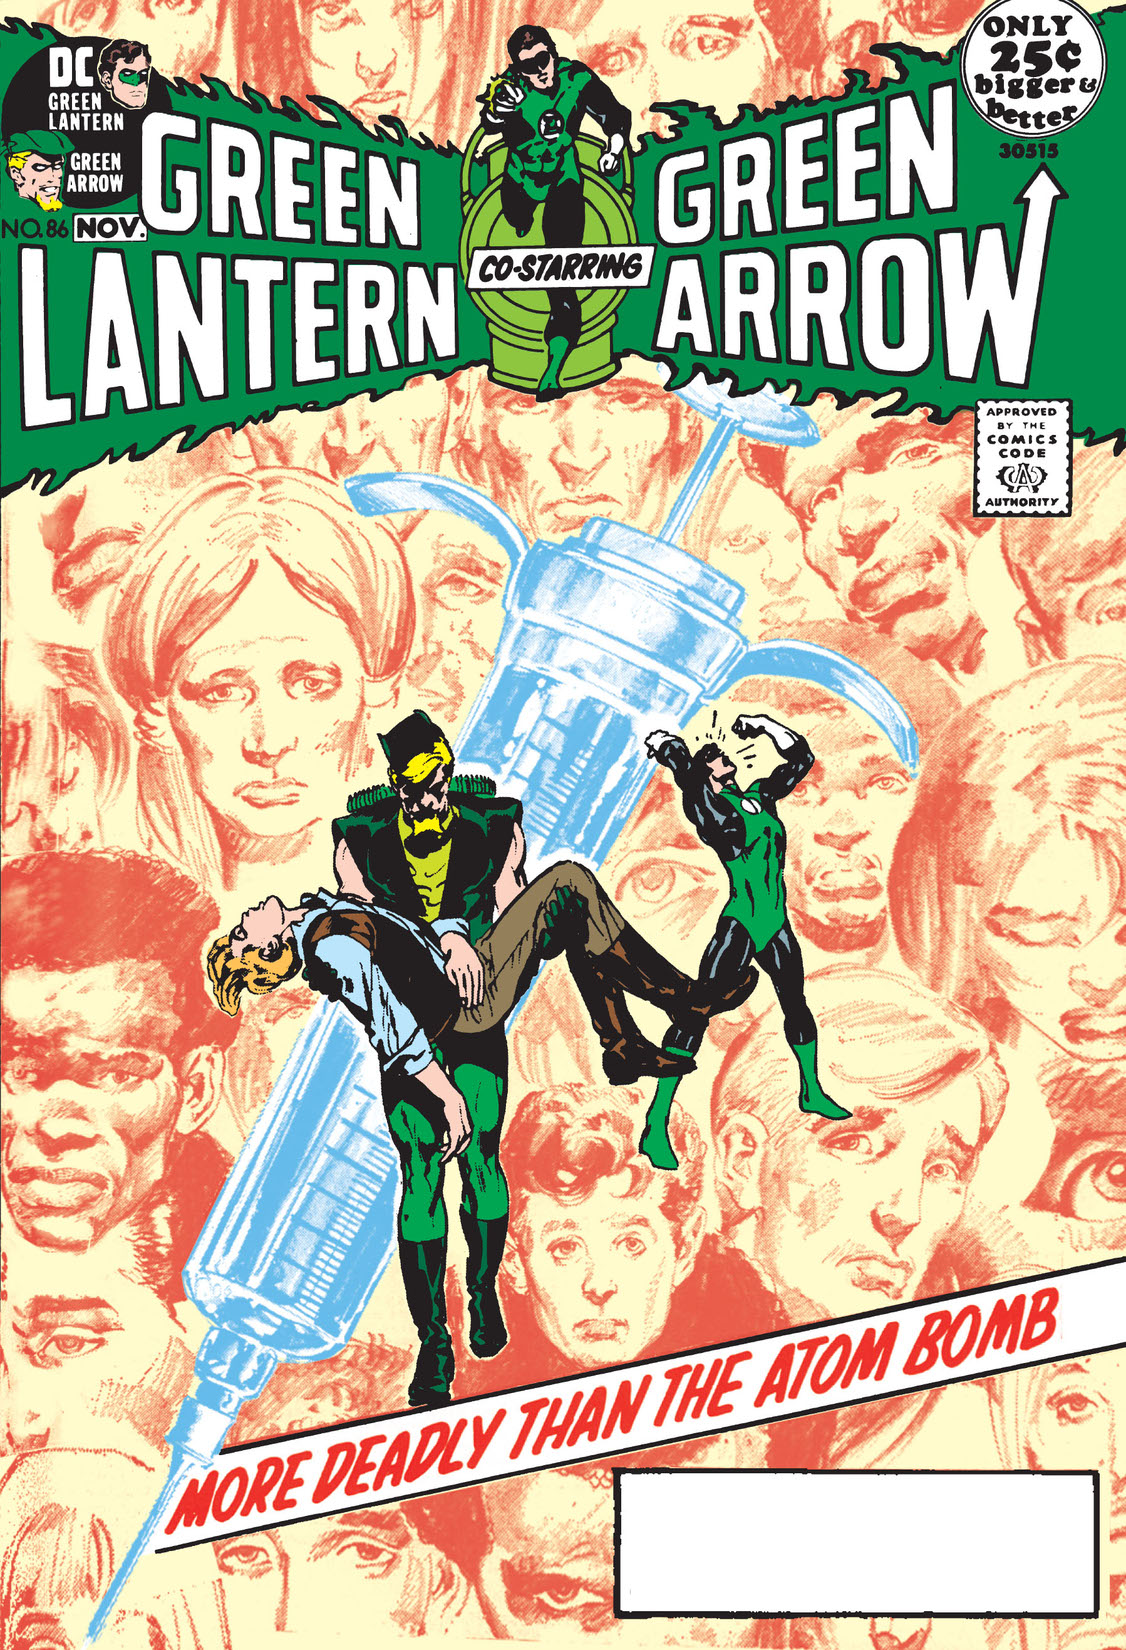 Green Lantern (1960-) #86 preview images